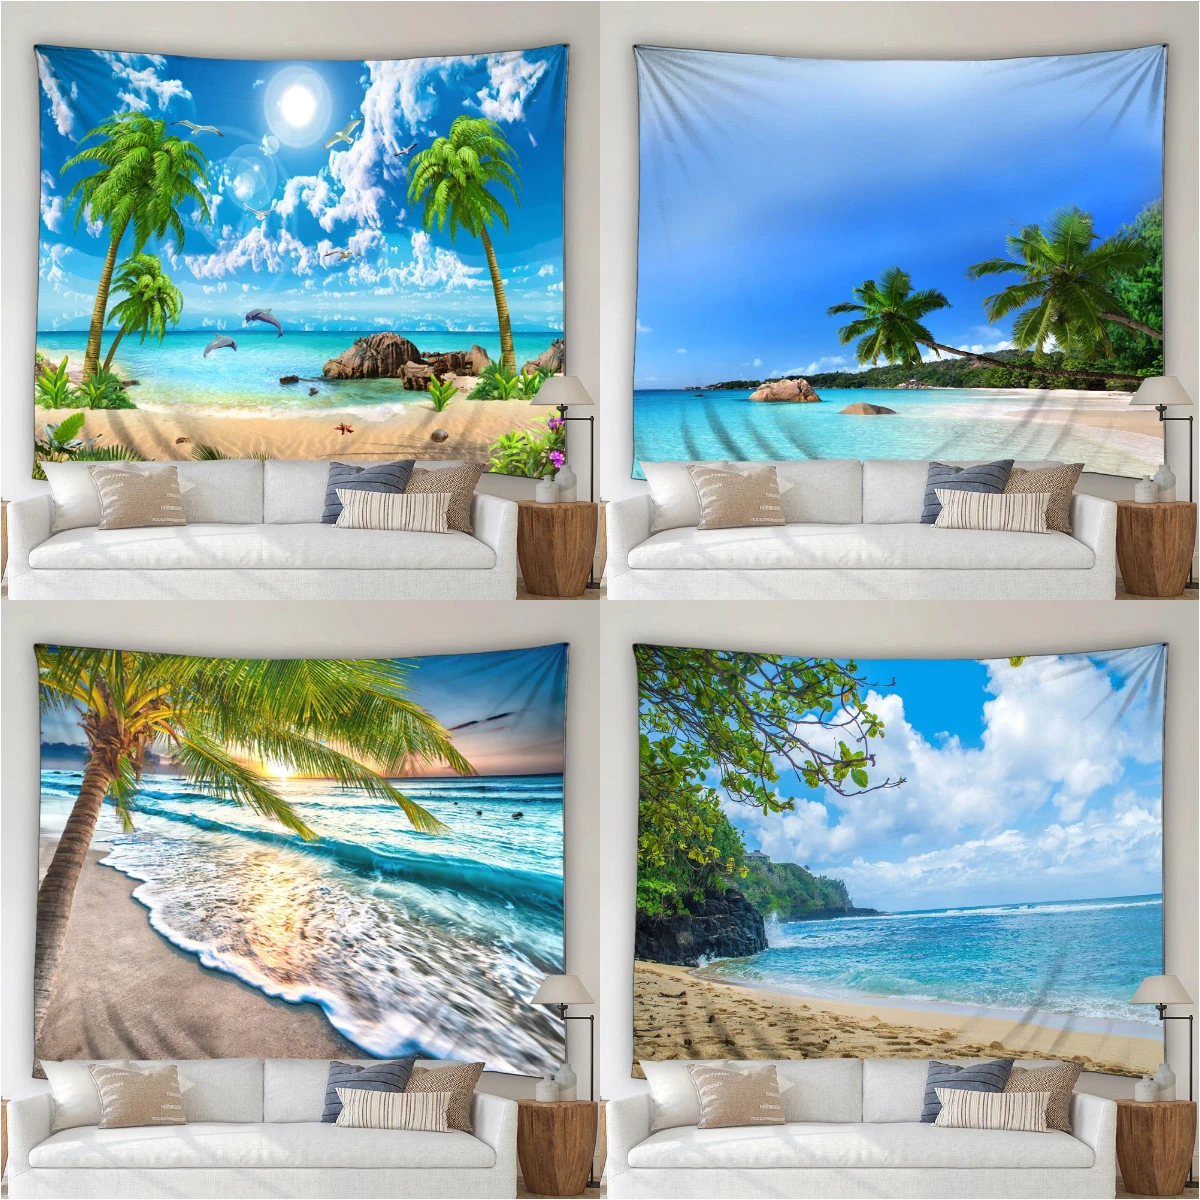 

Ocean Scenery Tapestry Seaside Beach Tropical Palm Tree Sailboat Outdoor Natural Garden Home Living Room Dorm Decor Wall Hanging